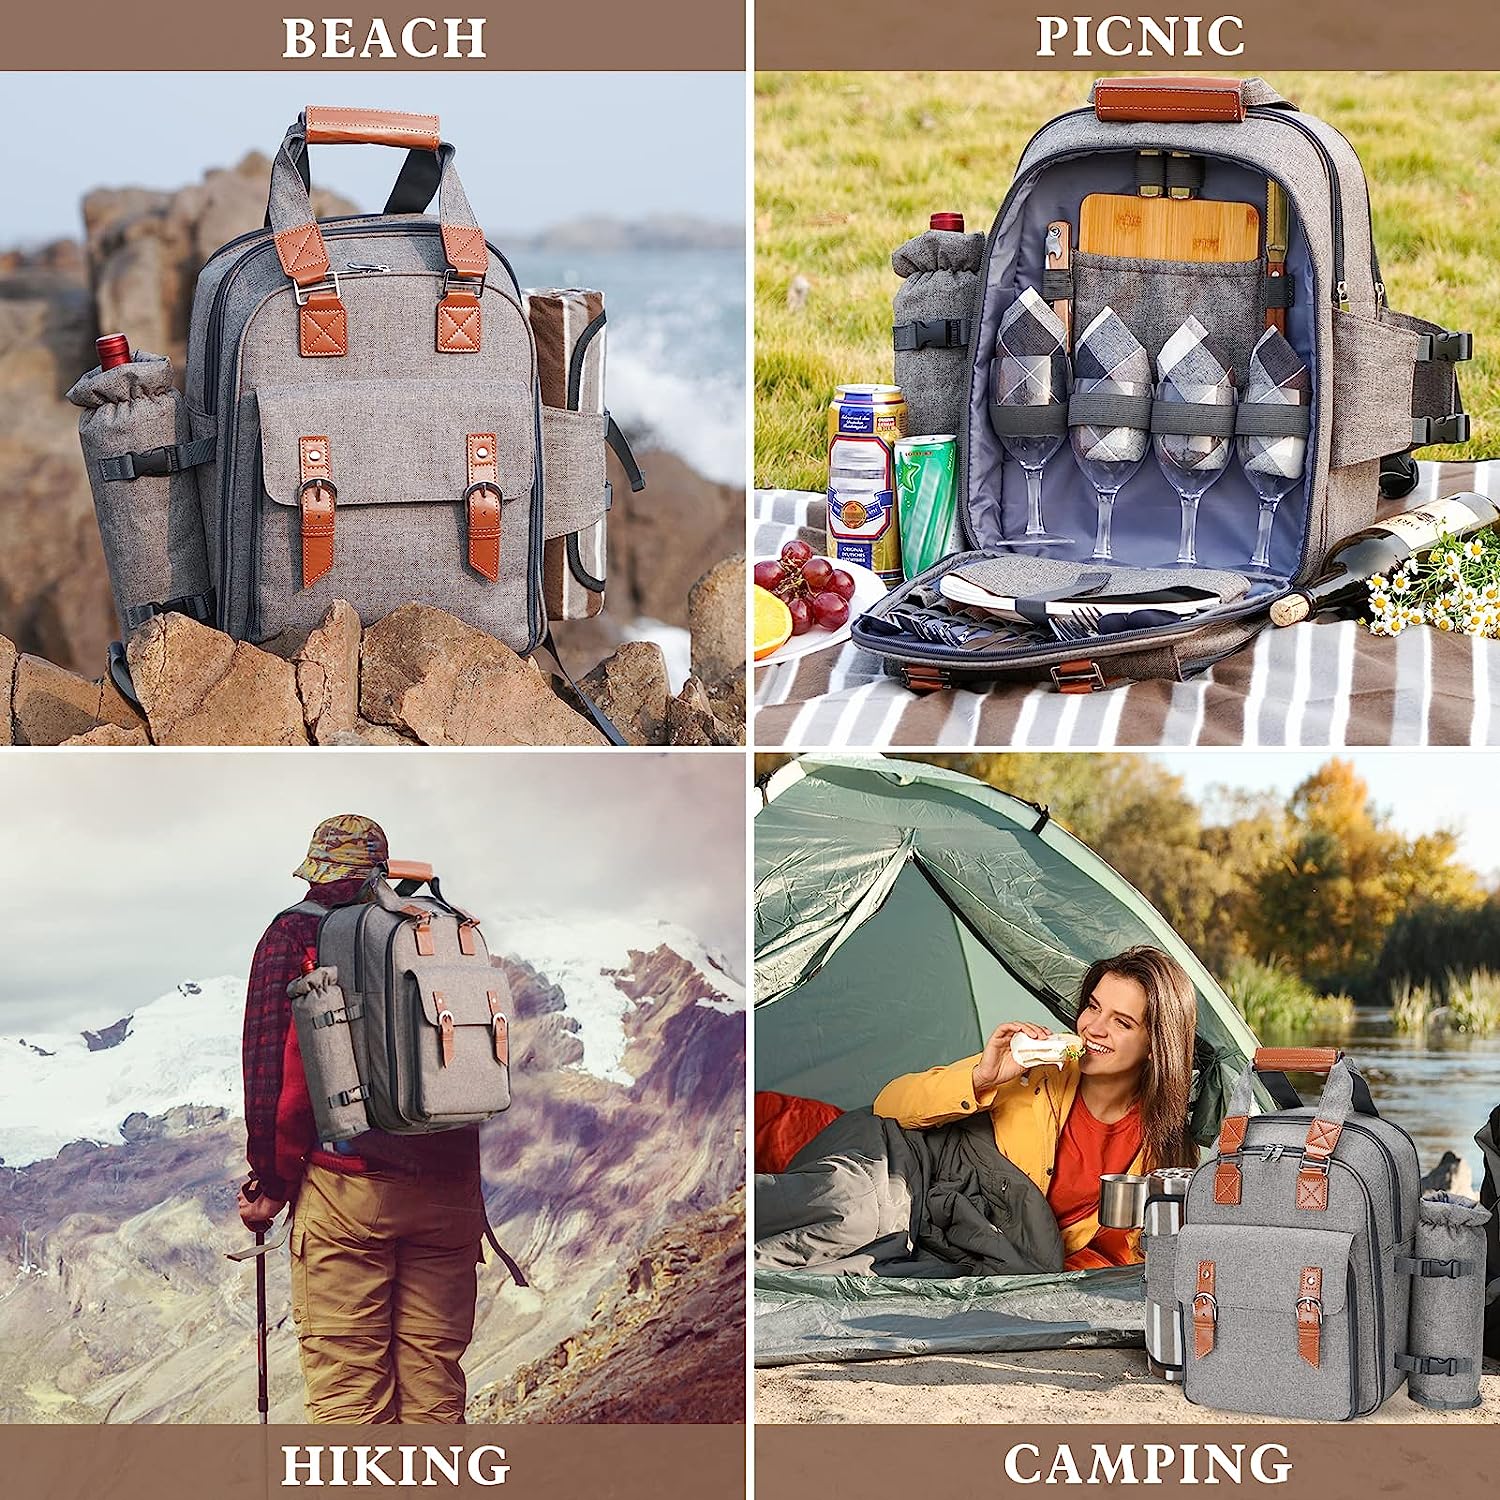 Picnic Backpack for 4 Person with Blanket， Picnic Bag Set with Cooler Compartment， Insulated Waterproof Pouch， Detachable Bottle/Wine Holder for Family Outdoor Camping， Beach， Day Travel， Hiking， BBQs